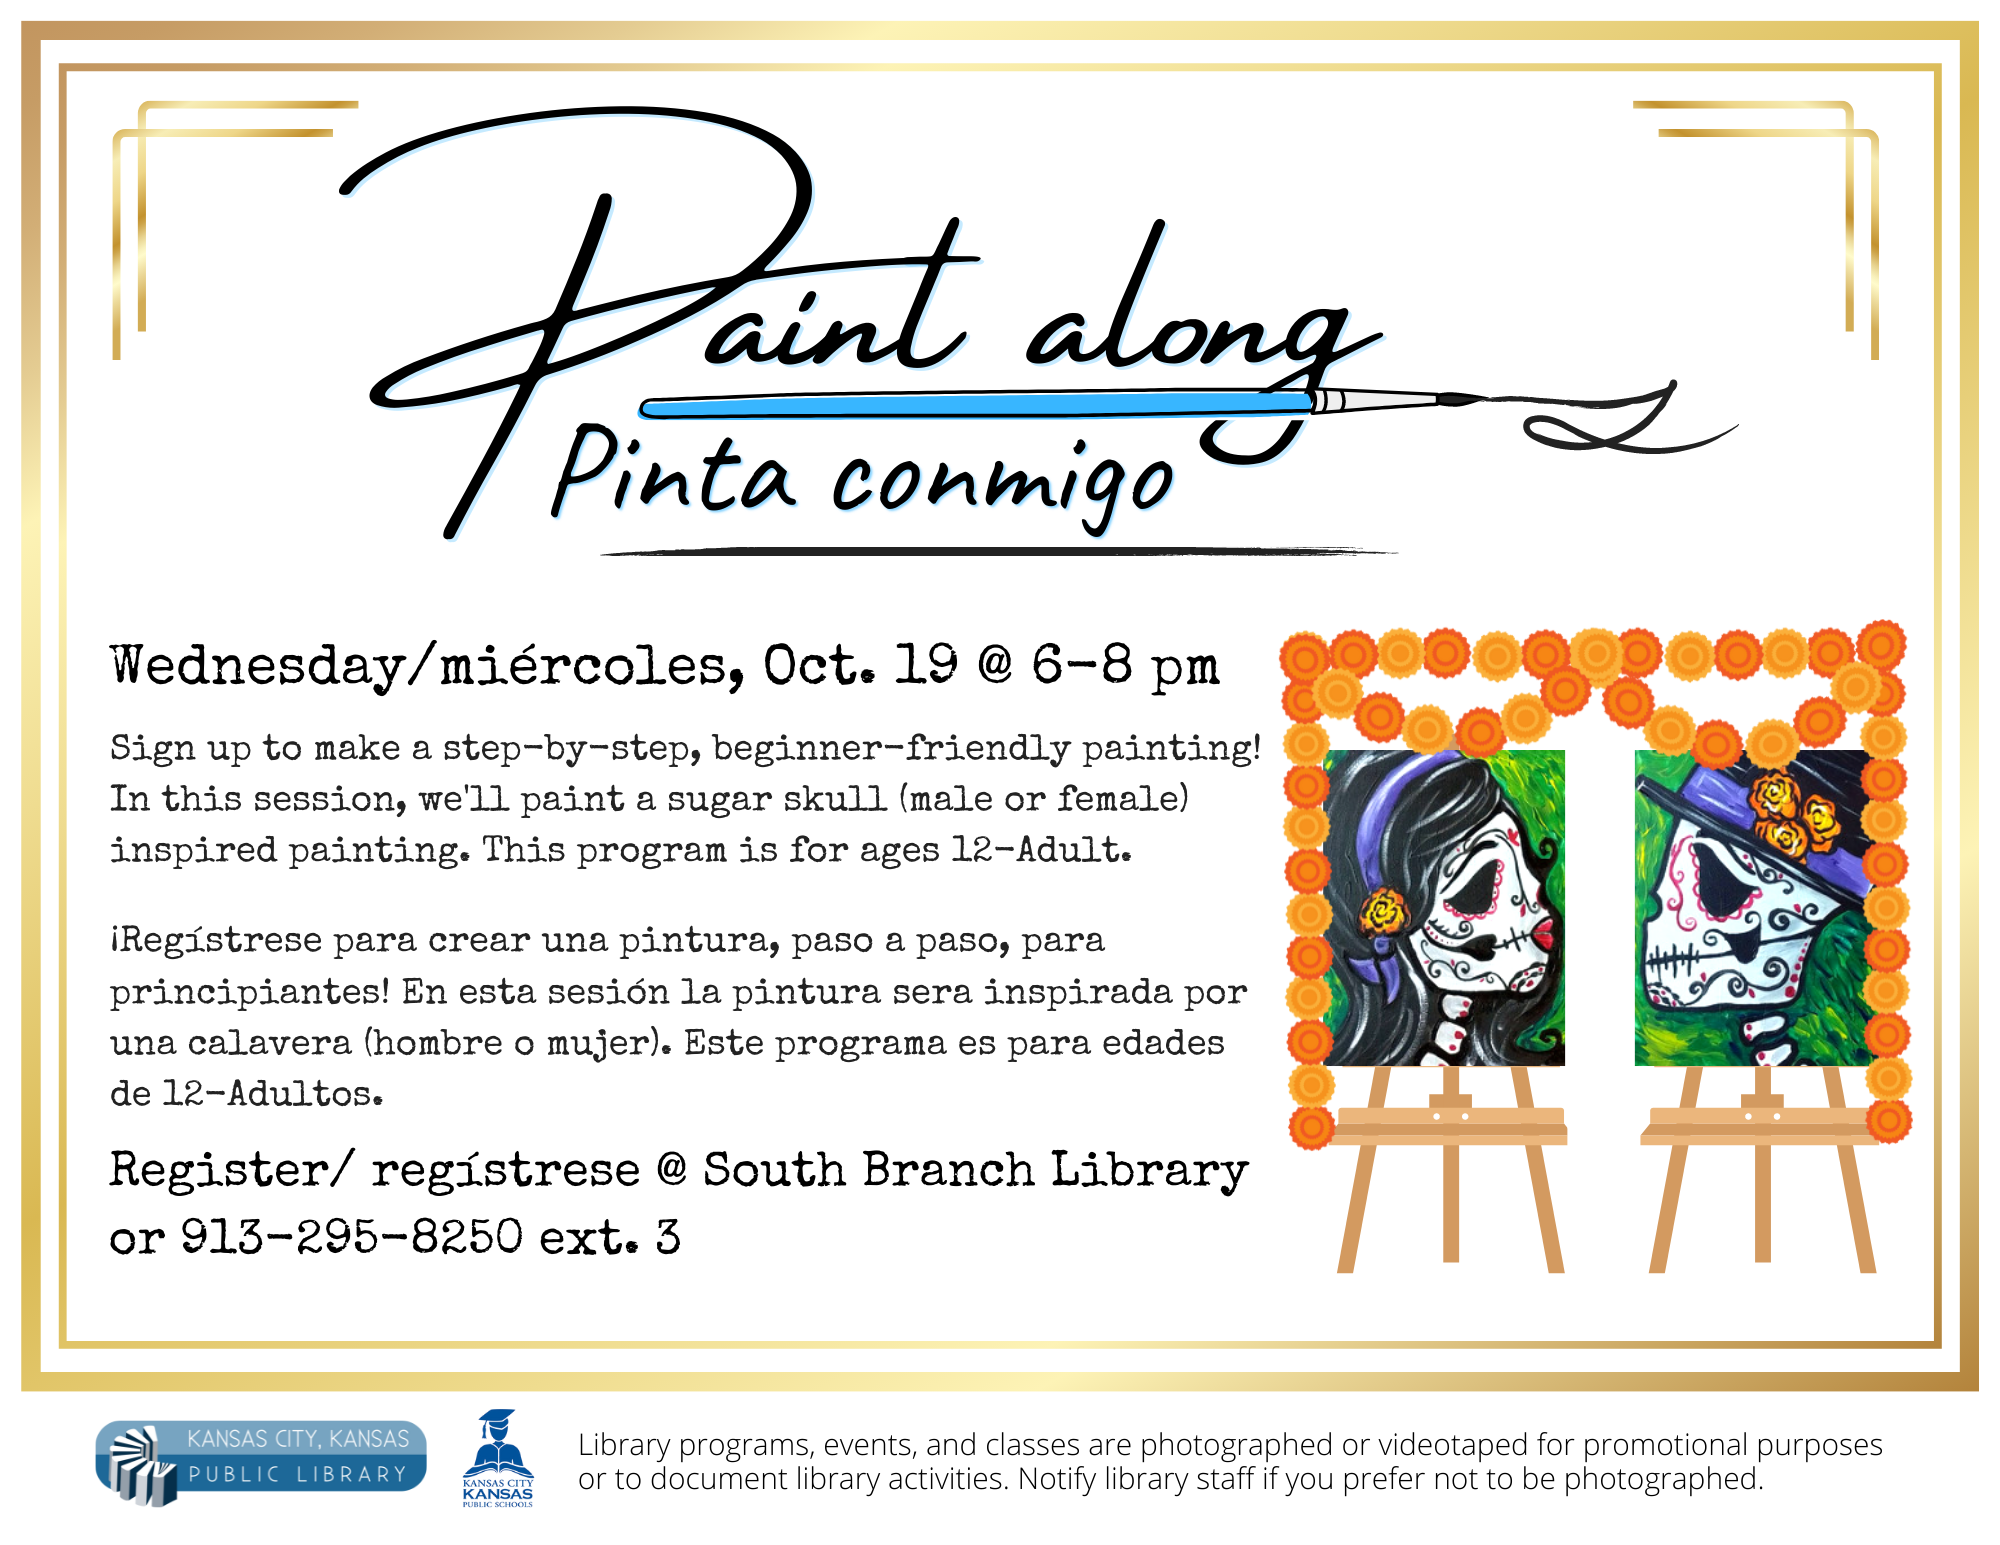 Paint along flyer showing possible sugar skull paintings